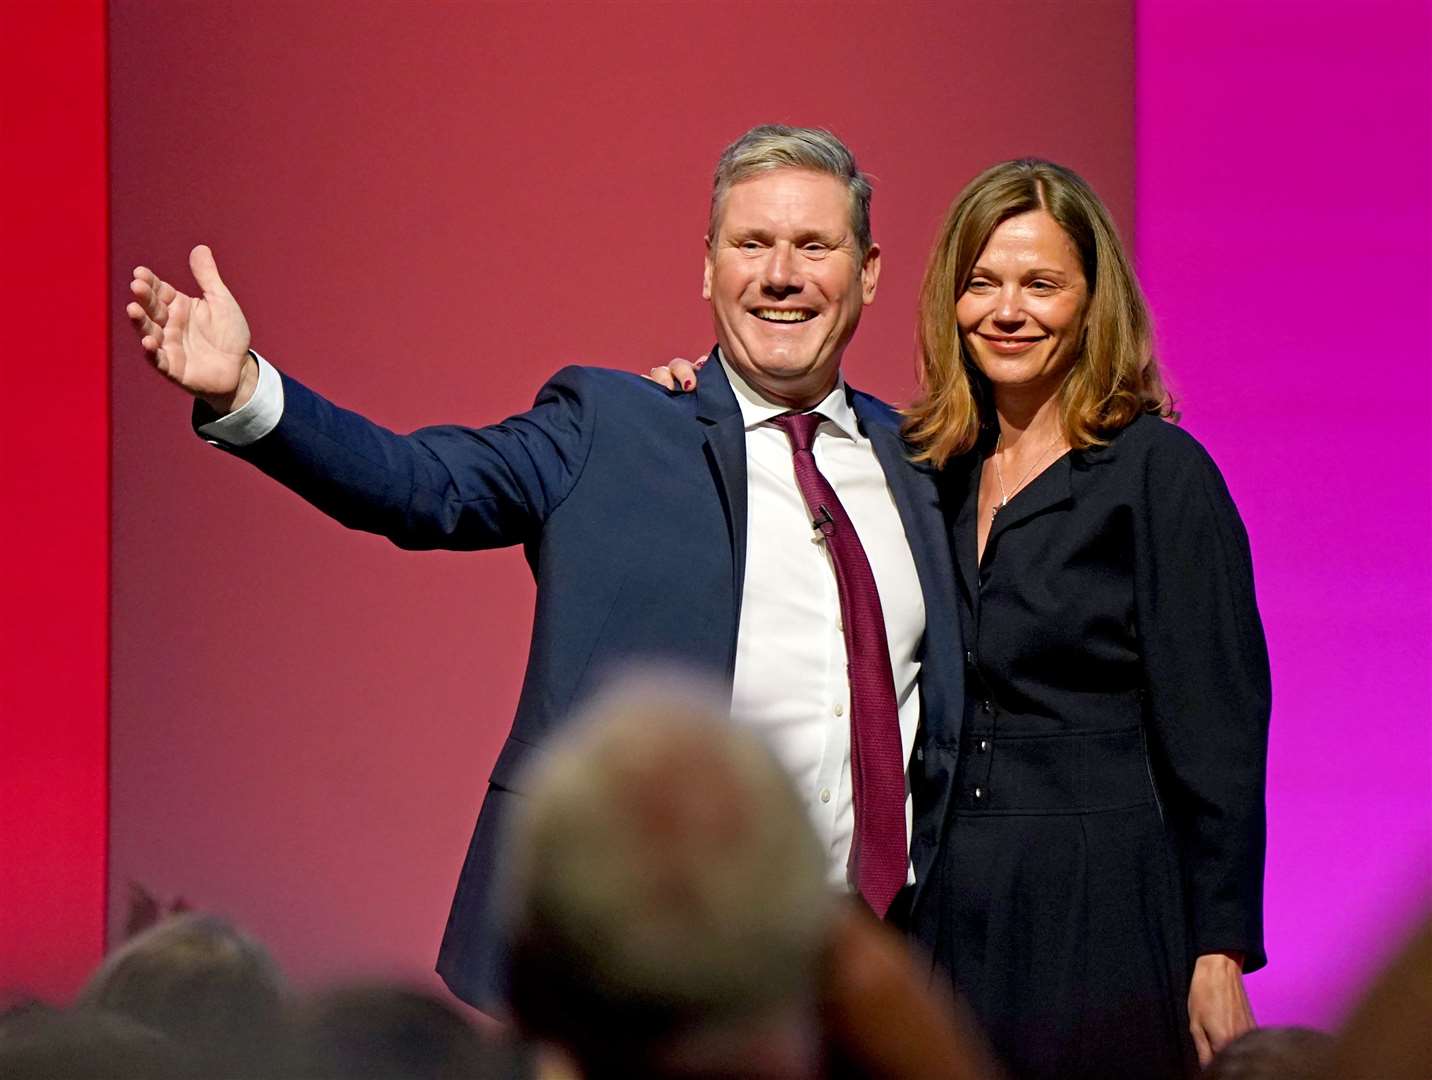 Sir Keir Starmer with his wife, Victoria, following his 2021 Labour Party conference speech in Brighton (Andrew Matthews/PA)